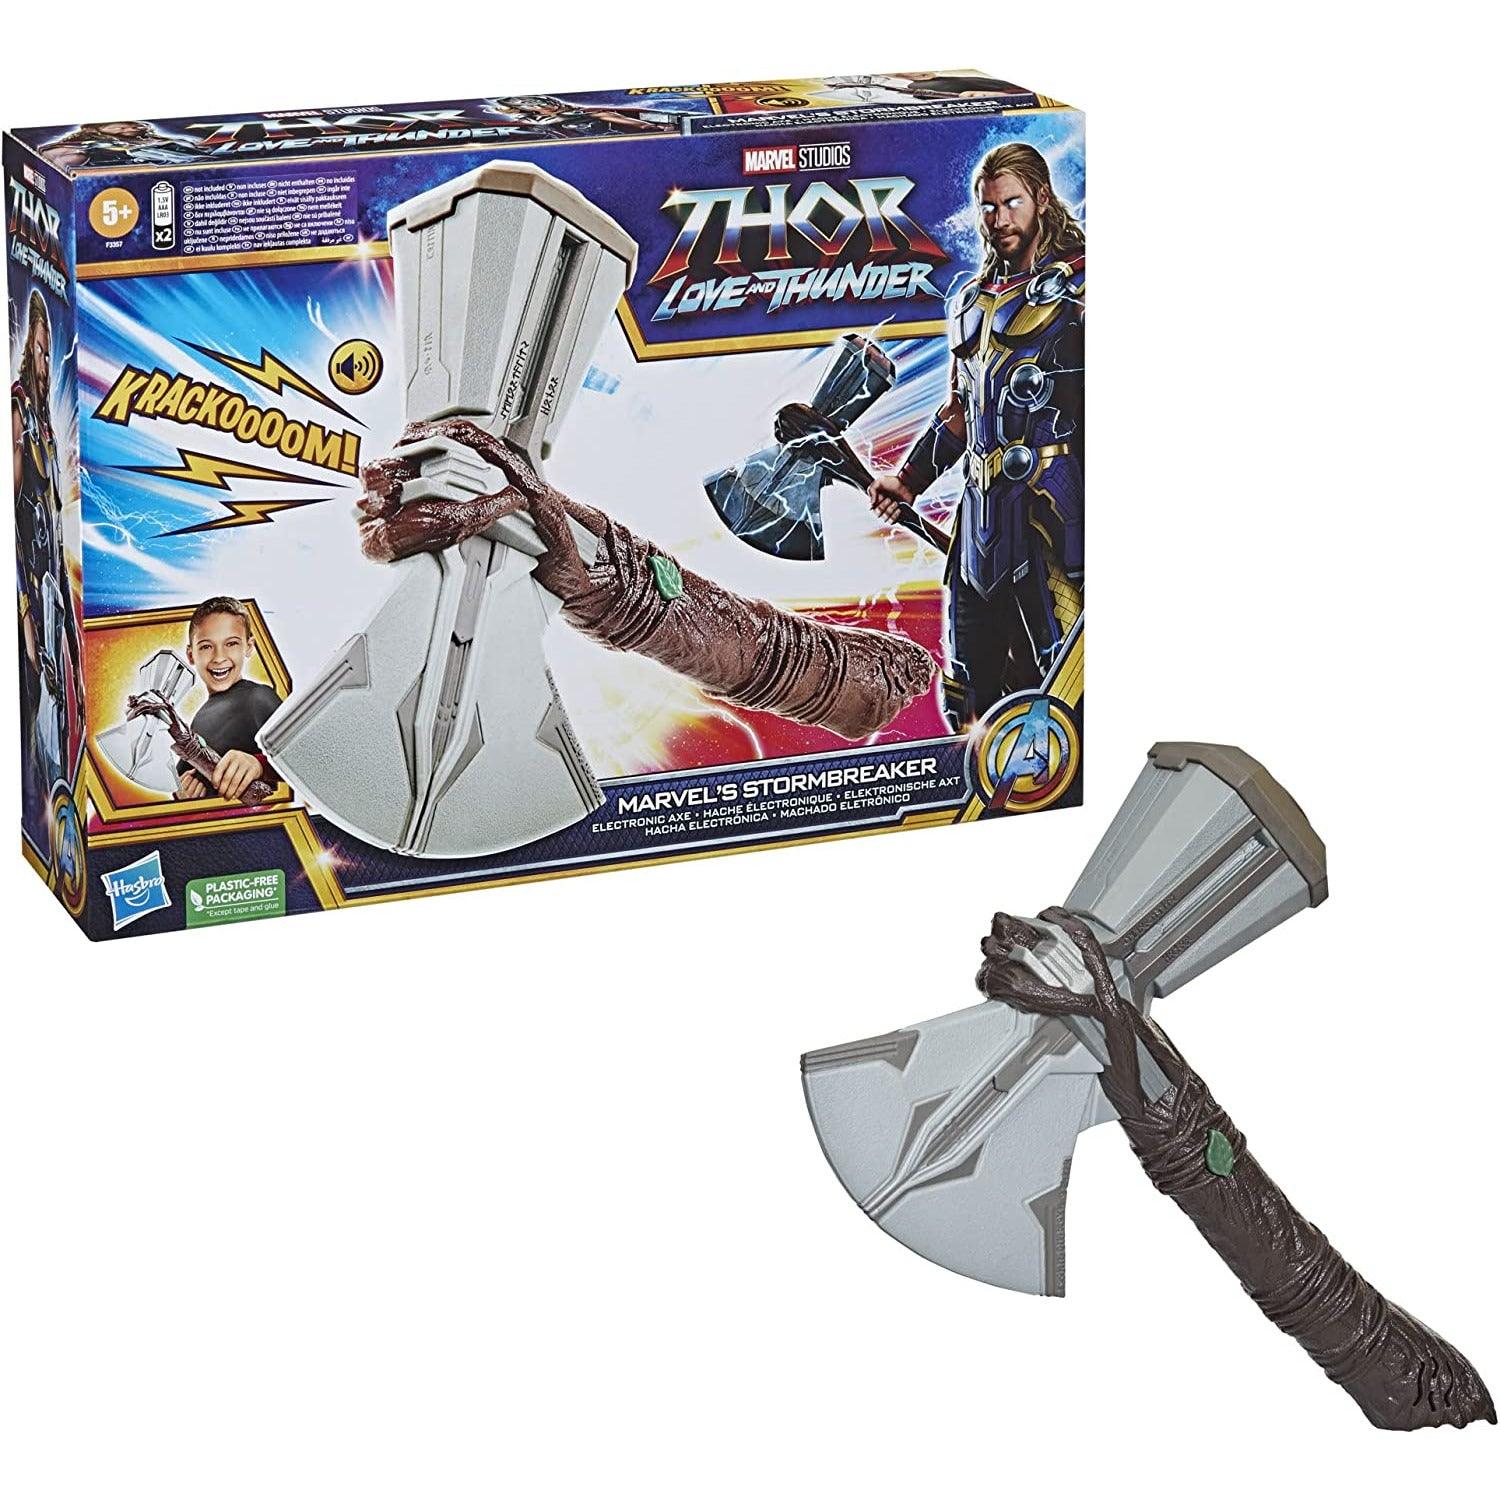 Marvel Studios’ Thor: Love and Thunder Stormbreaker Electronic Axe Thor Roleplay Toy with Sound FX, Toys for Kids Ages 5 and Up - BumbleToys - 8+ Years, 8-13 Years, Action Figures, Avengers, Boys, Figures, LEGO, Marvel, New Arrivals, OXE, Pre-Order, Thor